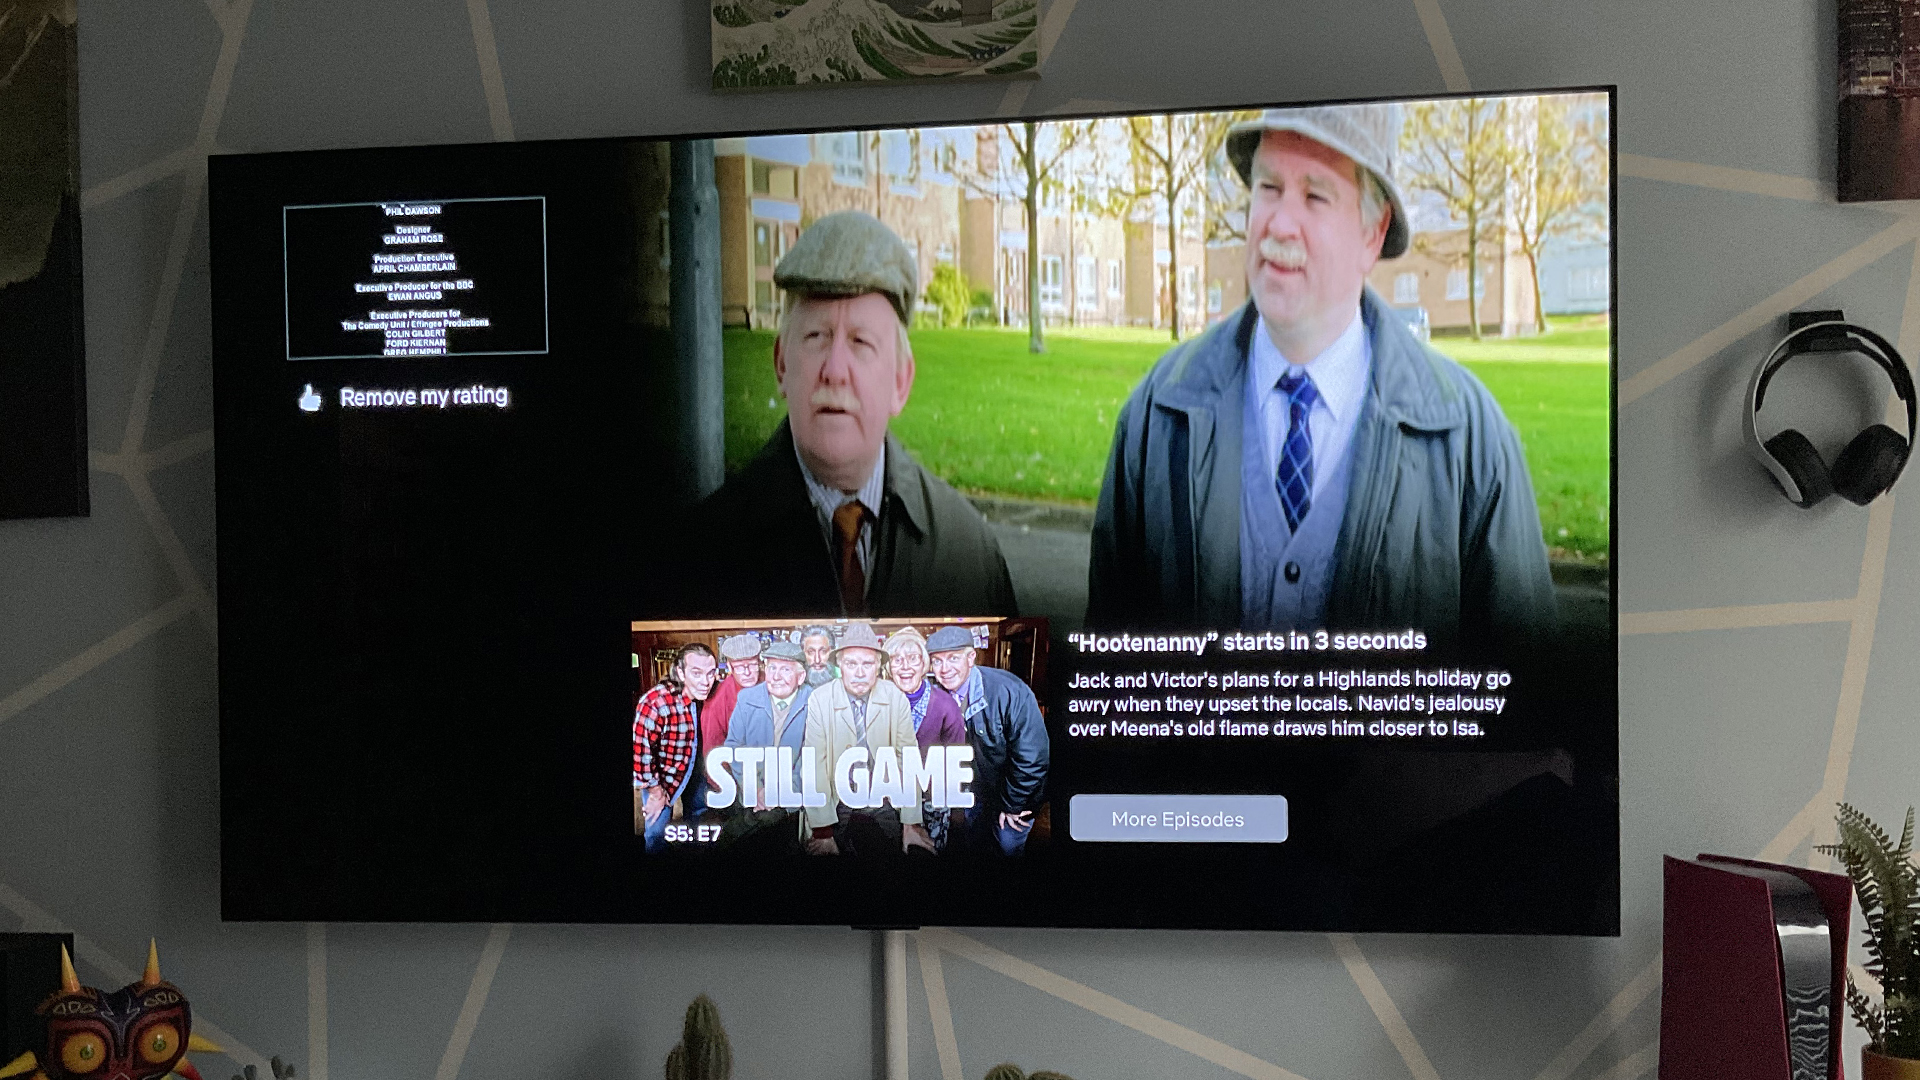 Netflix auto-play feature happening on OLED TV showing Still Game